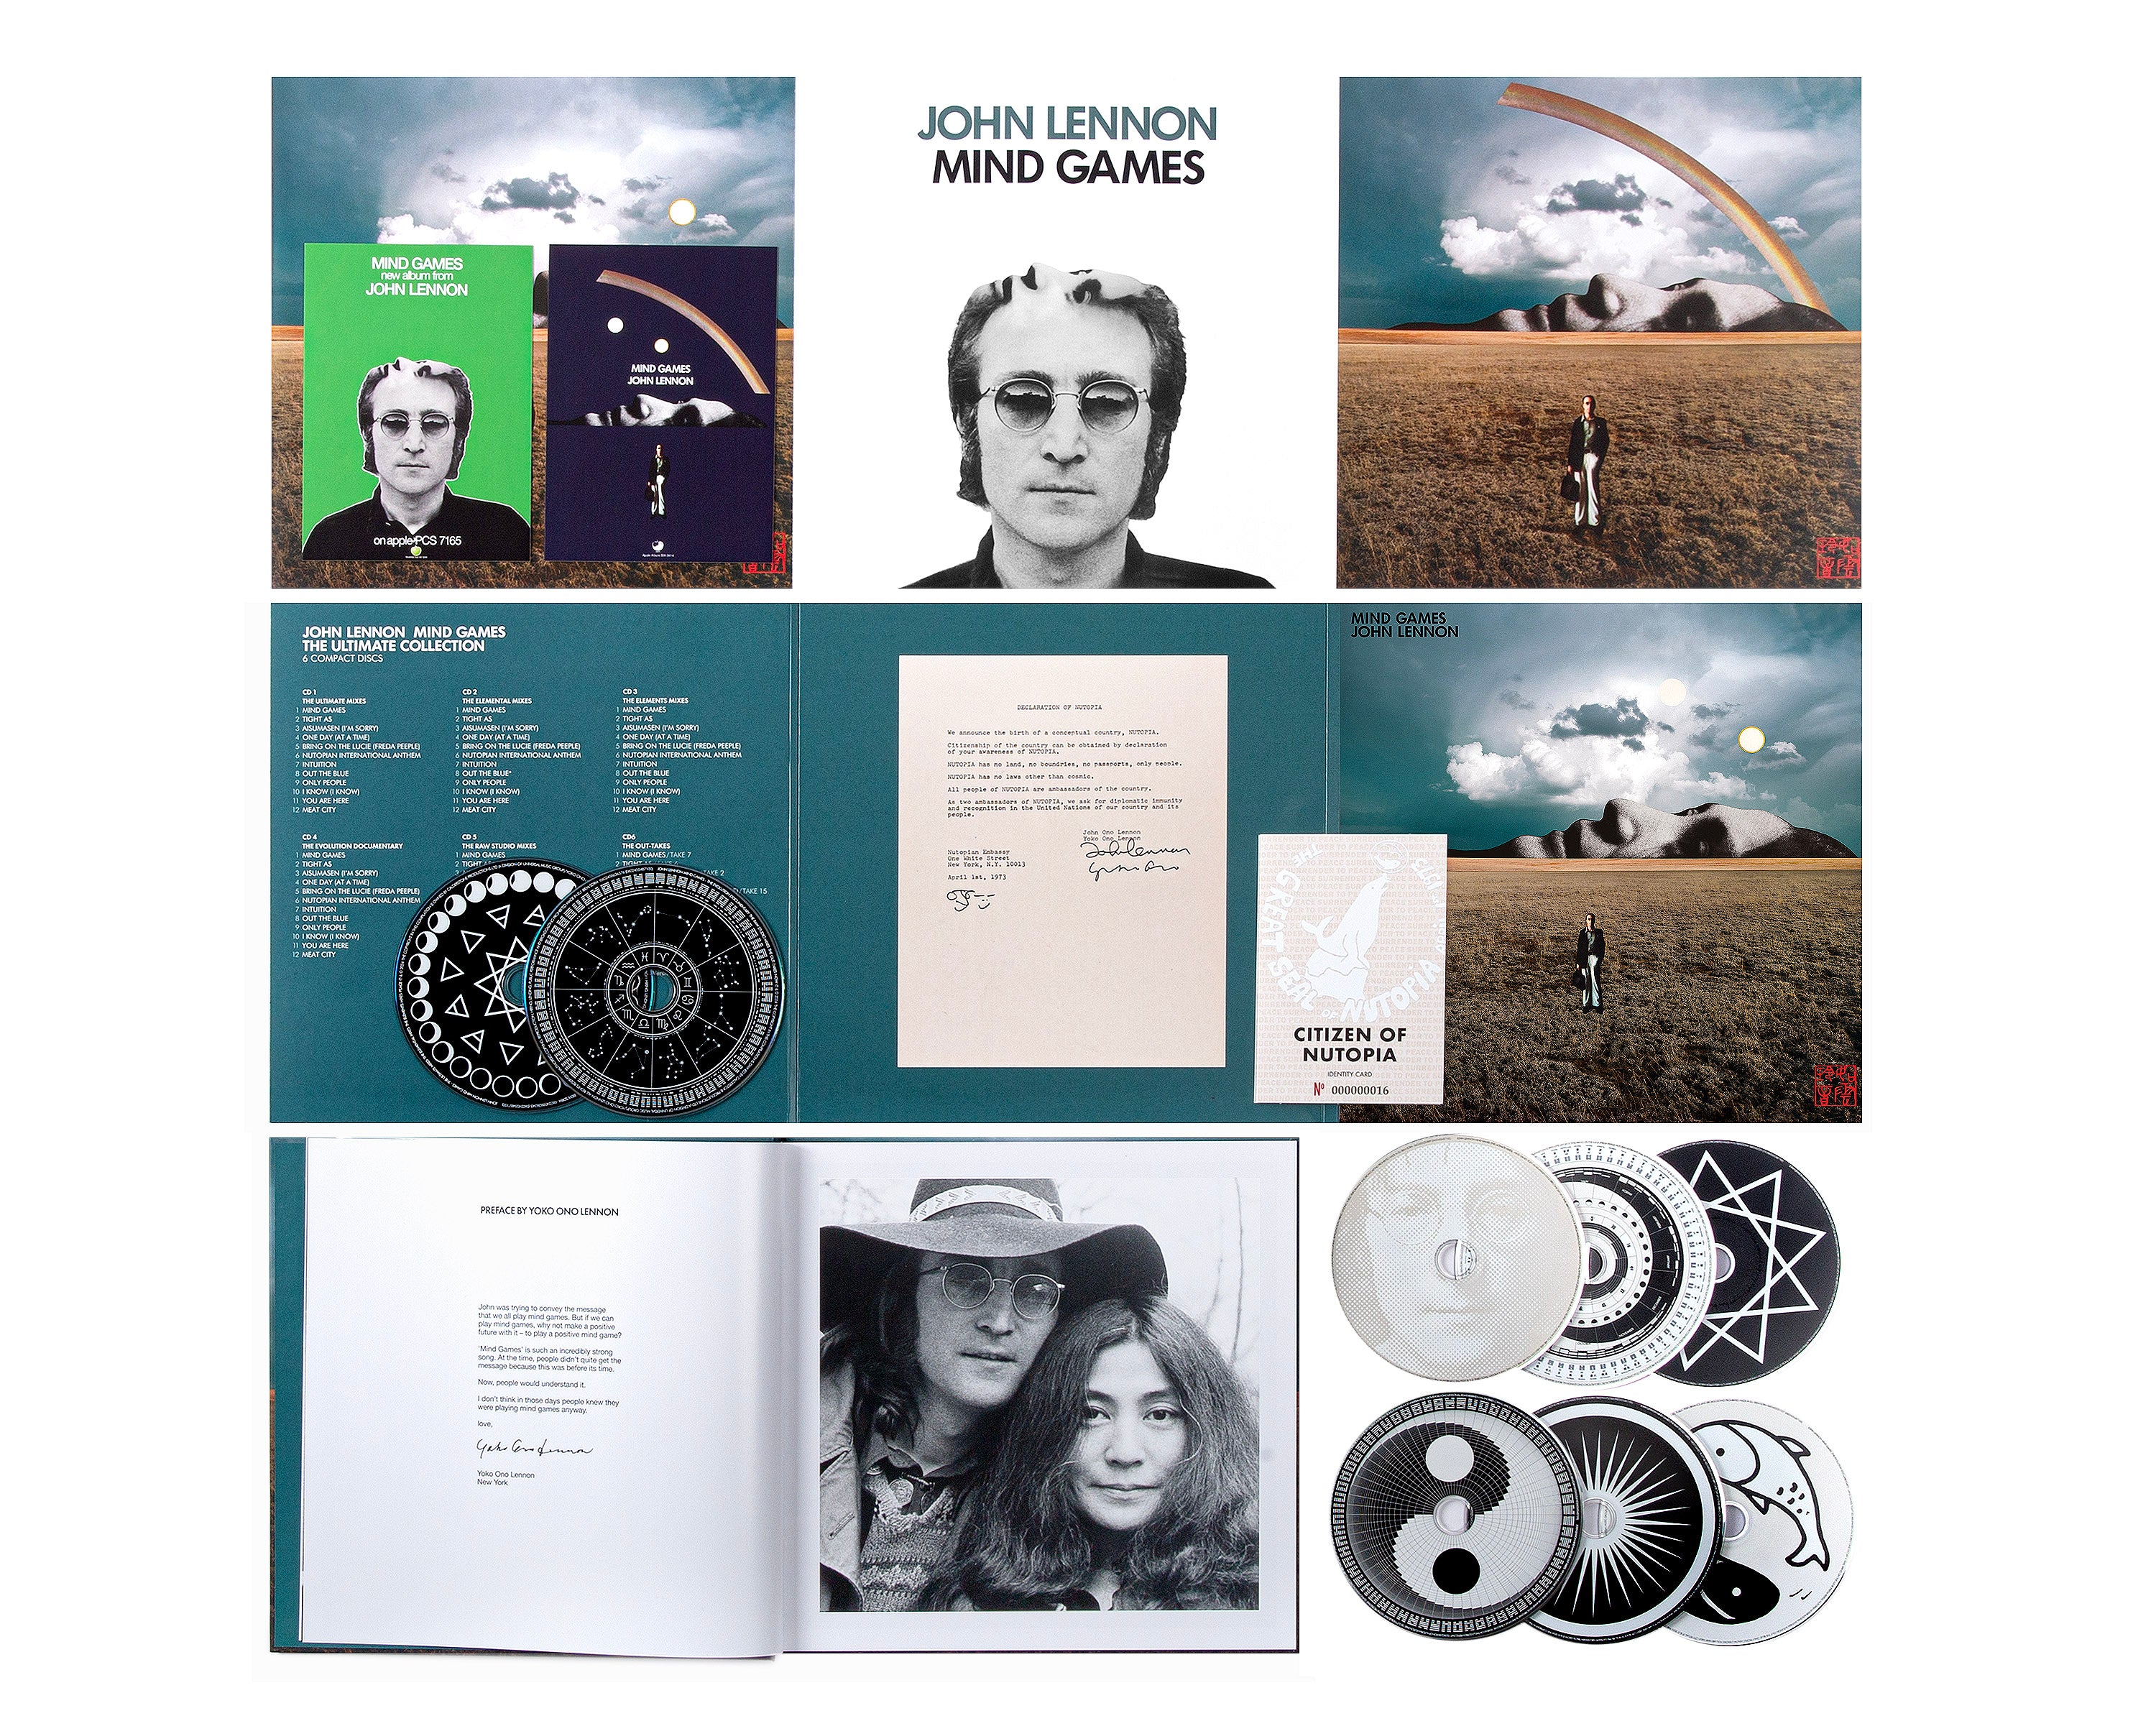 John Lennon, Yoko Ono - Mind Games (The Ultimate Collection): Deluxe Box Set.